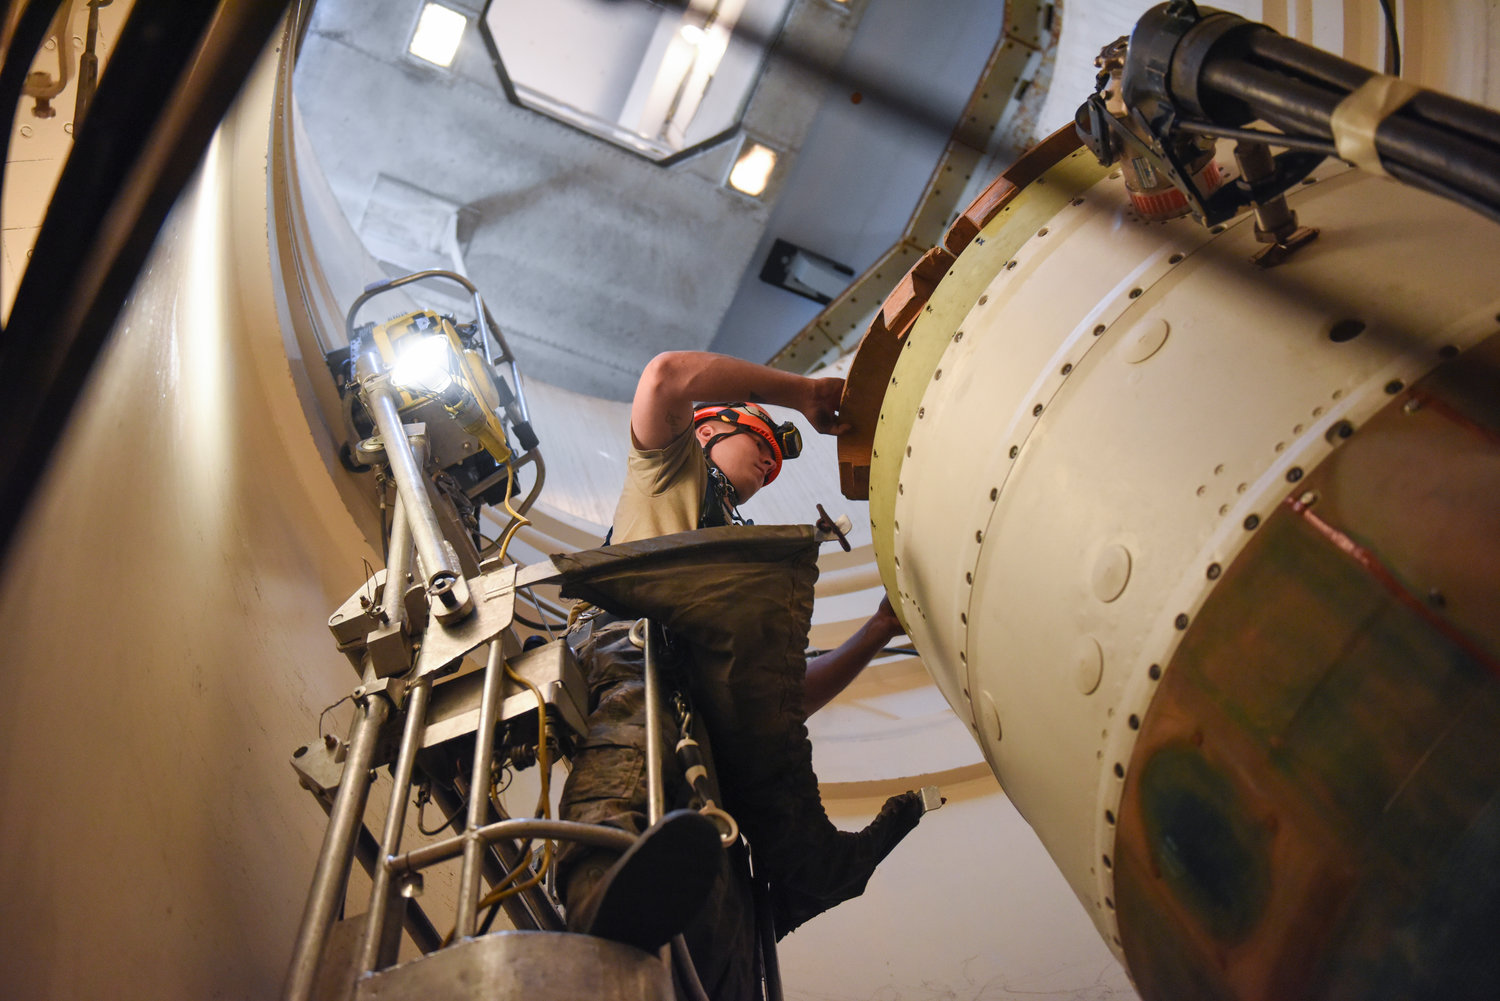 In this image provided by the U.S. Air Force, Airman 1st Class Jackson Ligon, 341st Missile Maintenance Squadron technician, prepares a spacer on an intercontinental ballistic missile during a Simulated Electronic Launch-Minuteman test Sept. 22, 2020, at a launch facility near Malmstrom Air Force Base in Great Falls, Mont. The top Air Force officer in charge of the nation's air and ground-launched nuclear missiles has requested an official investigation into the number of officers who are reporting the same type of blood cancer after serving at Malmstrom Air Force Base. (Tristan Day/U.S. Air Force via AP)